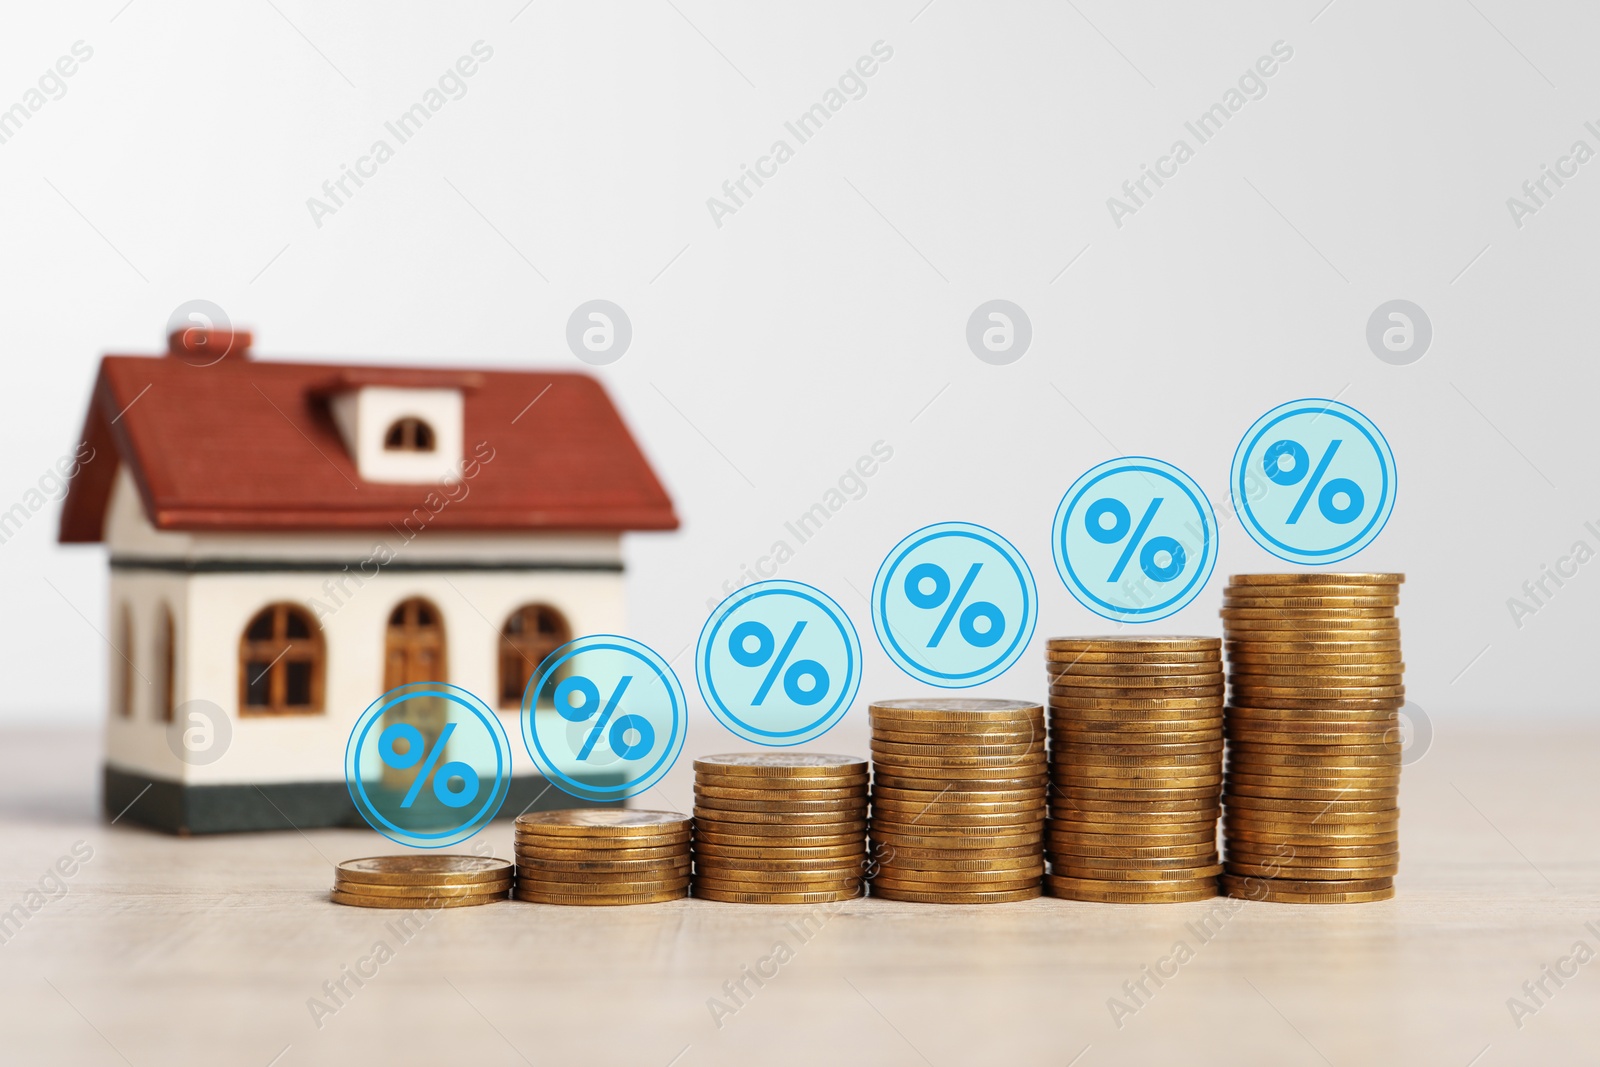 Image of Mortgage rate. Stacked coins, percent signs and model of house